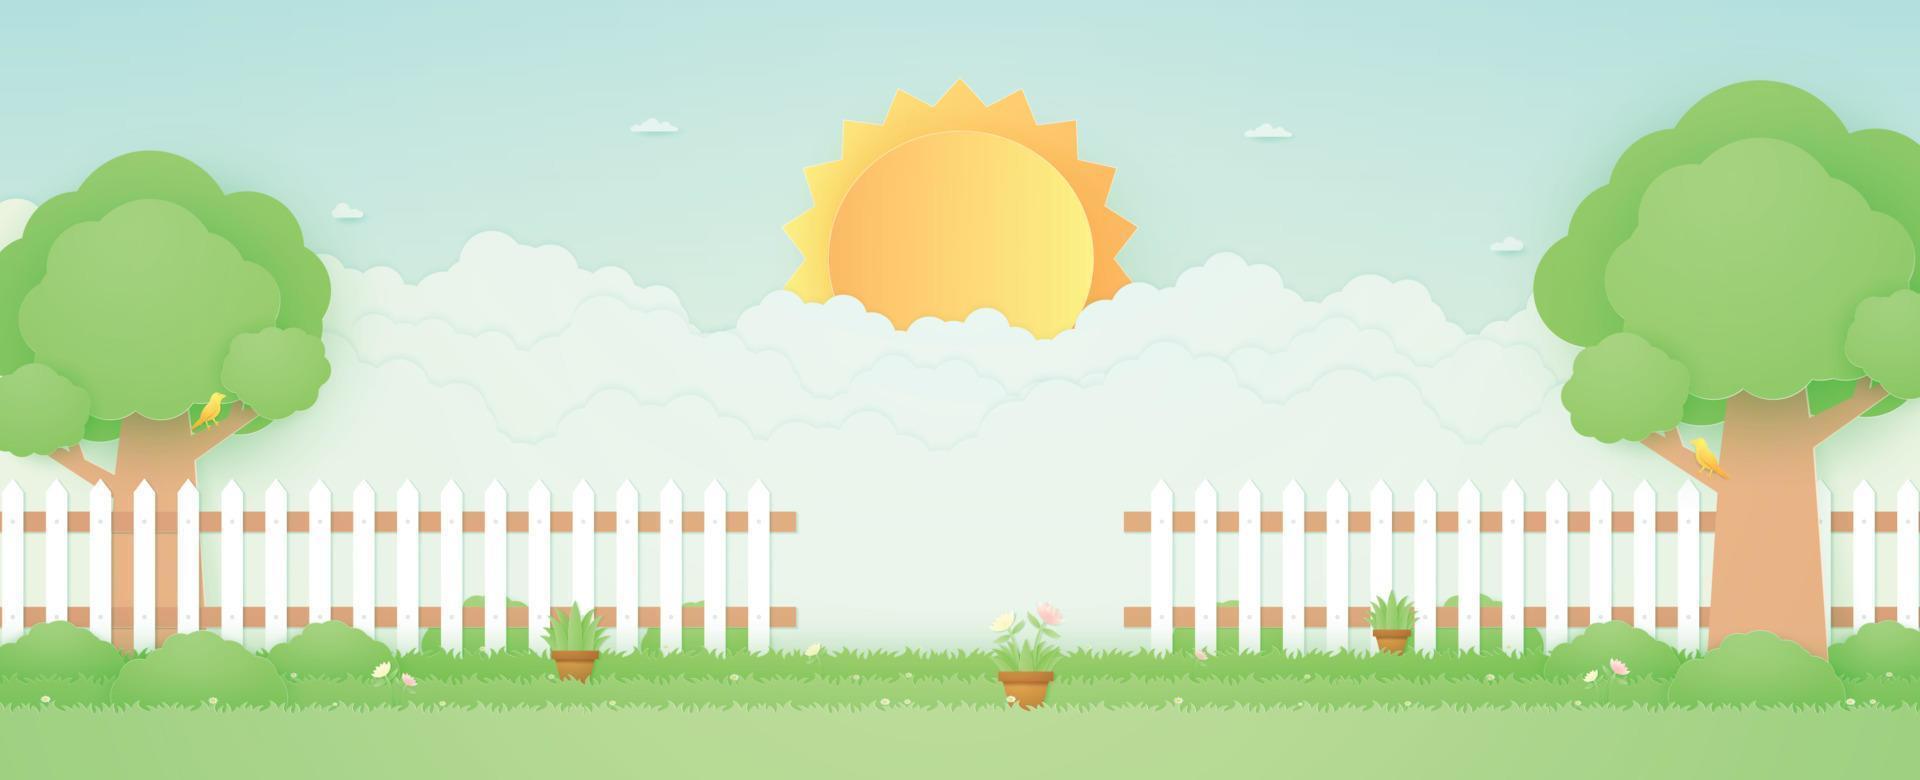 Spring Time, landscape, garden with trees, plant pots, beautiful flowers on grass and fence, bird on the branch, bright sun and cloud, paper art style vector